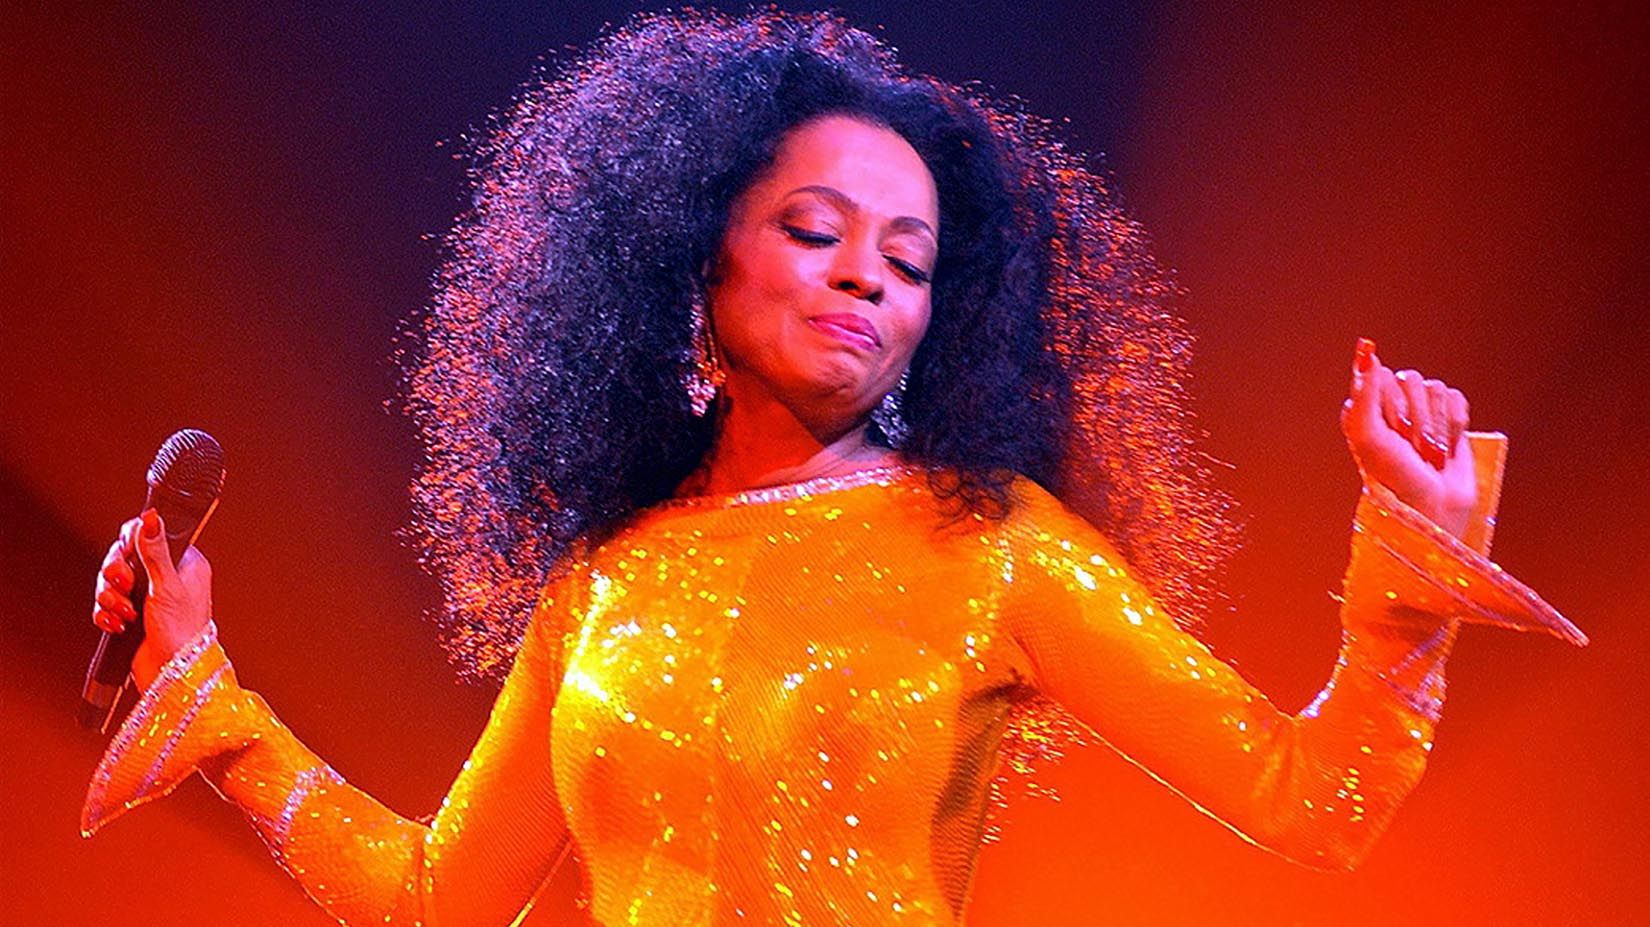 Diana Ross wearing a yellow suit